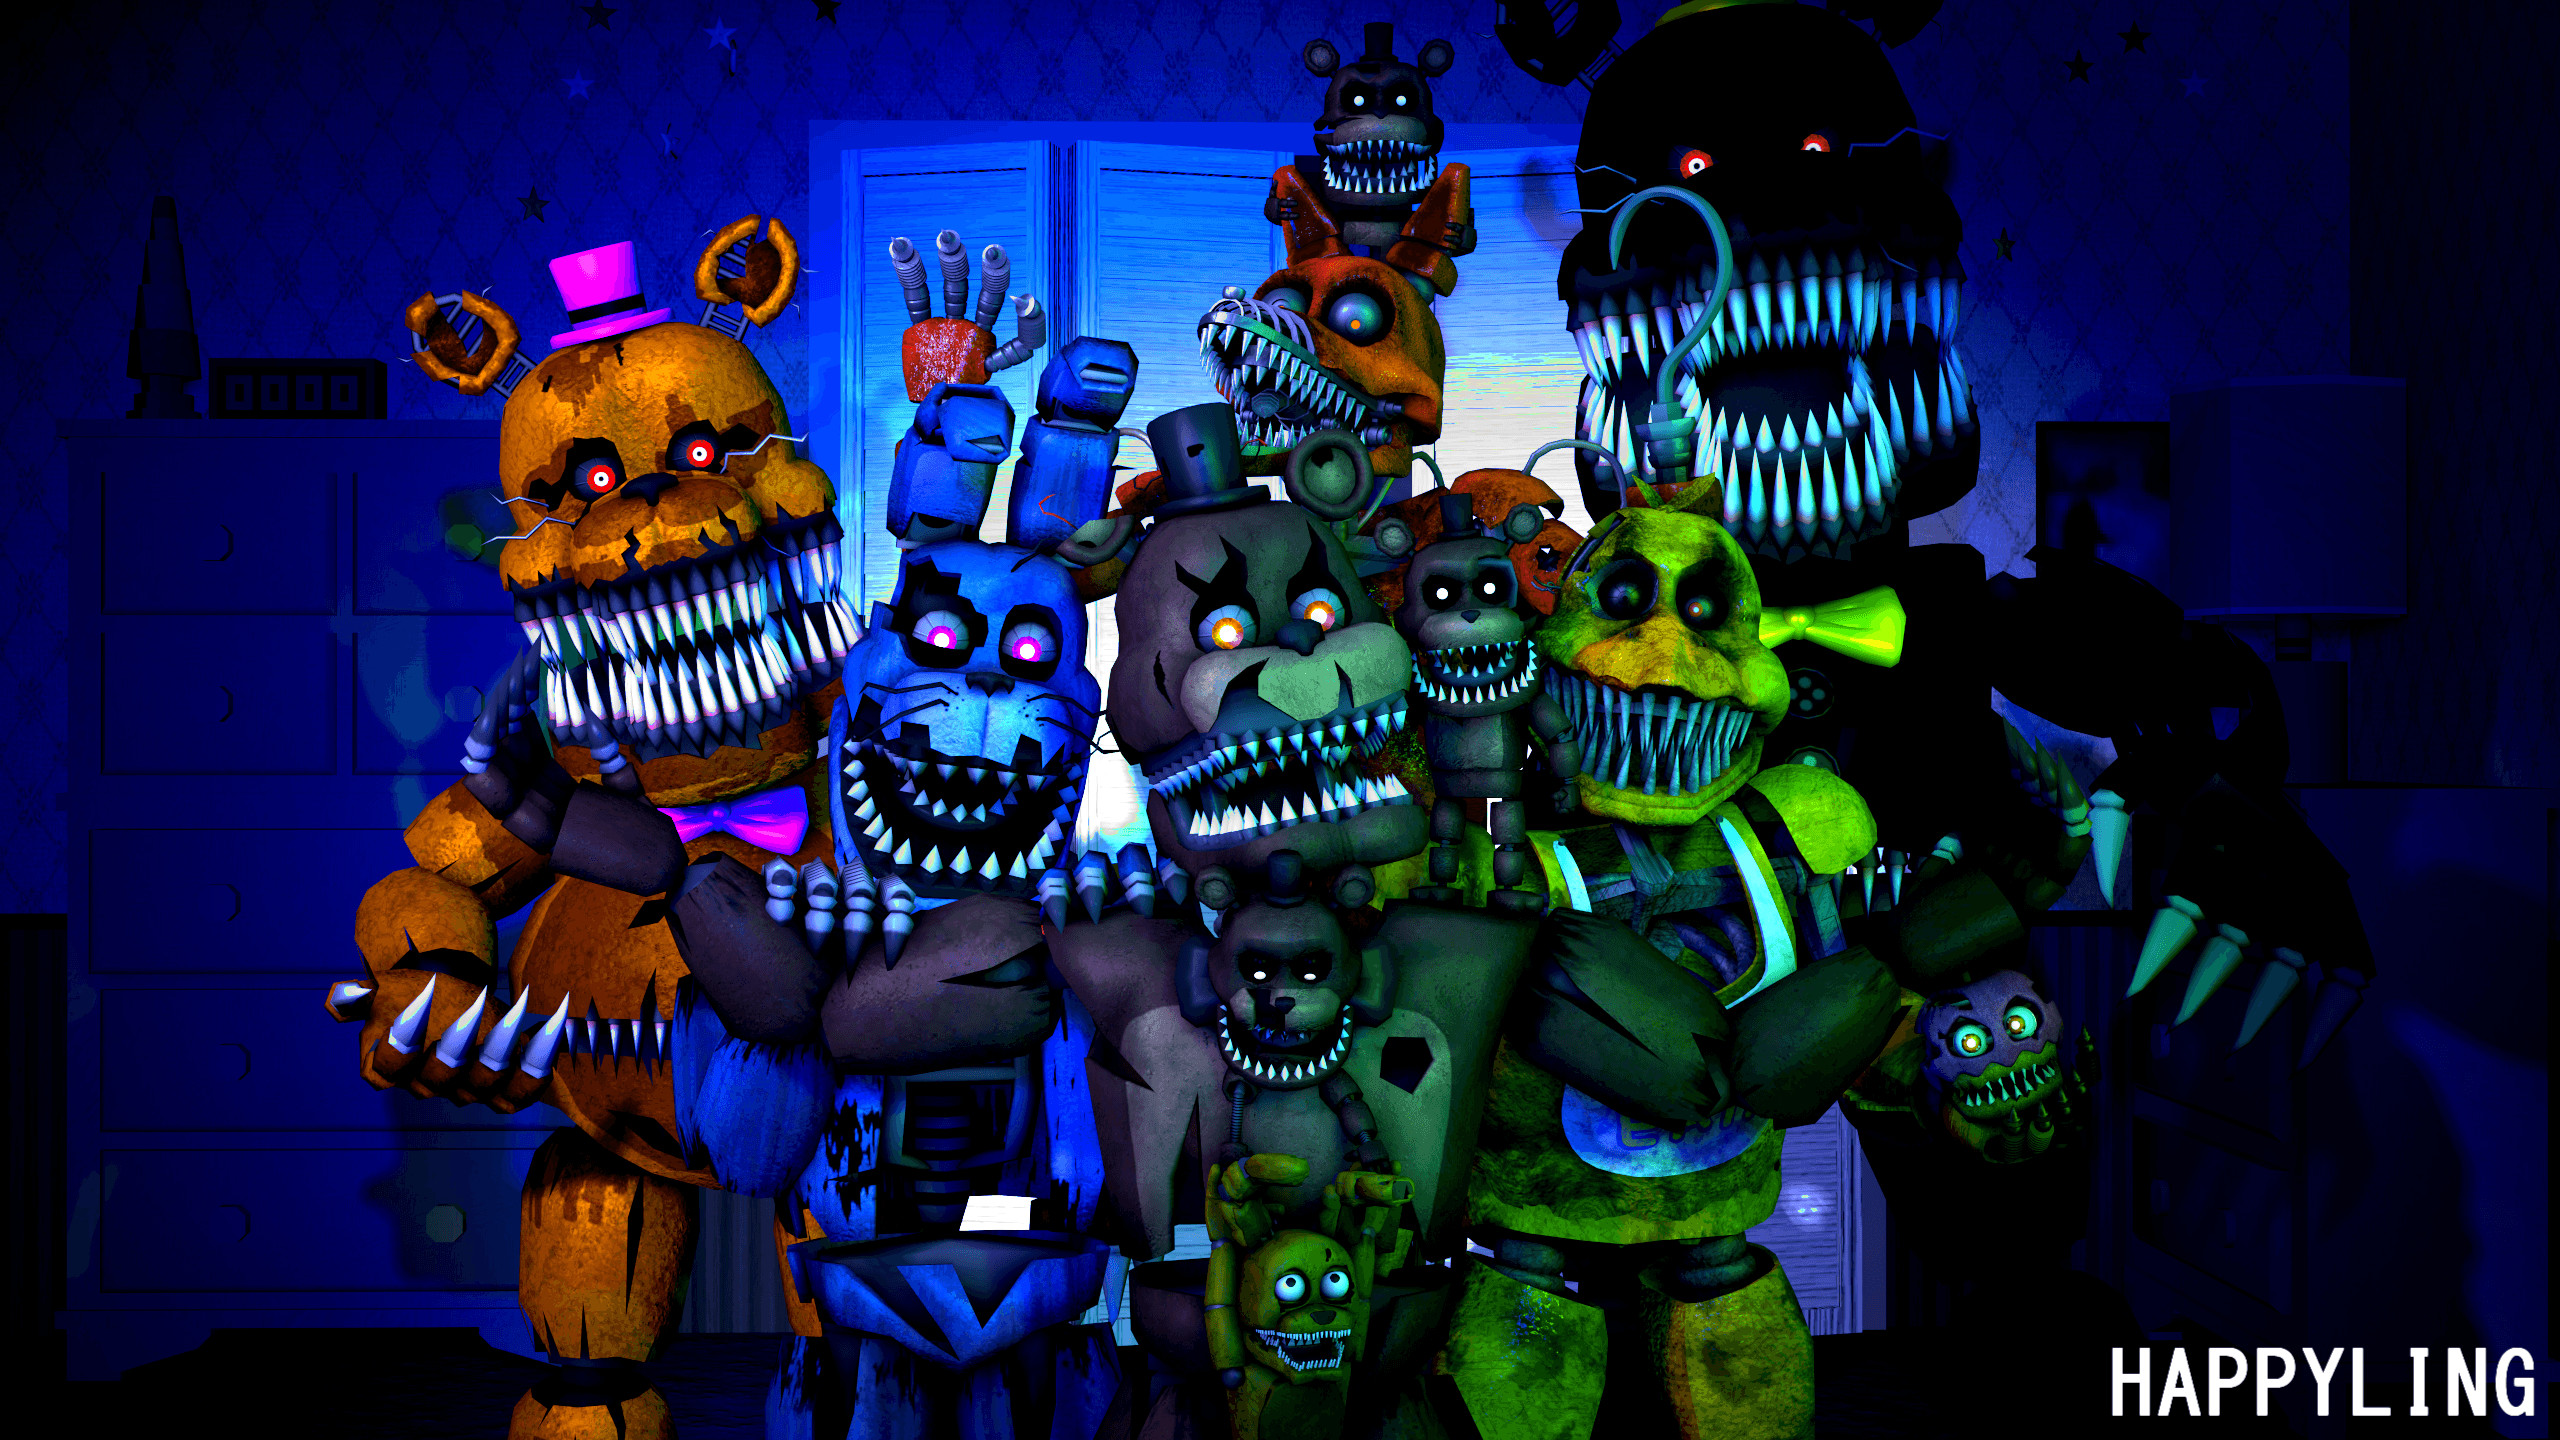 1000 images about Five Nights At Freddys on Pinterest FNAF